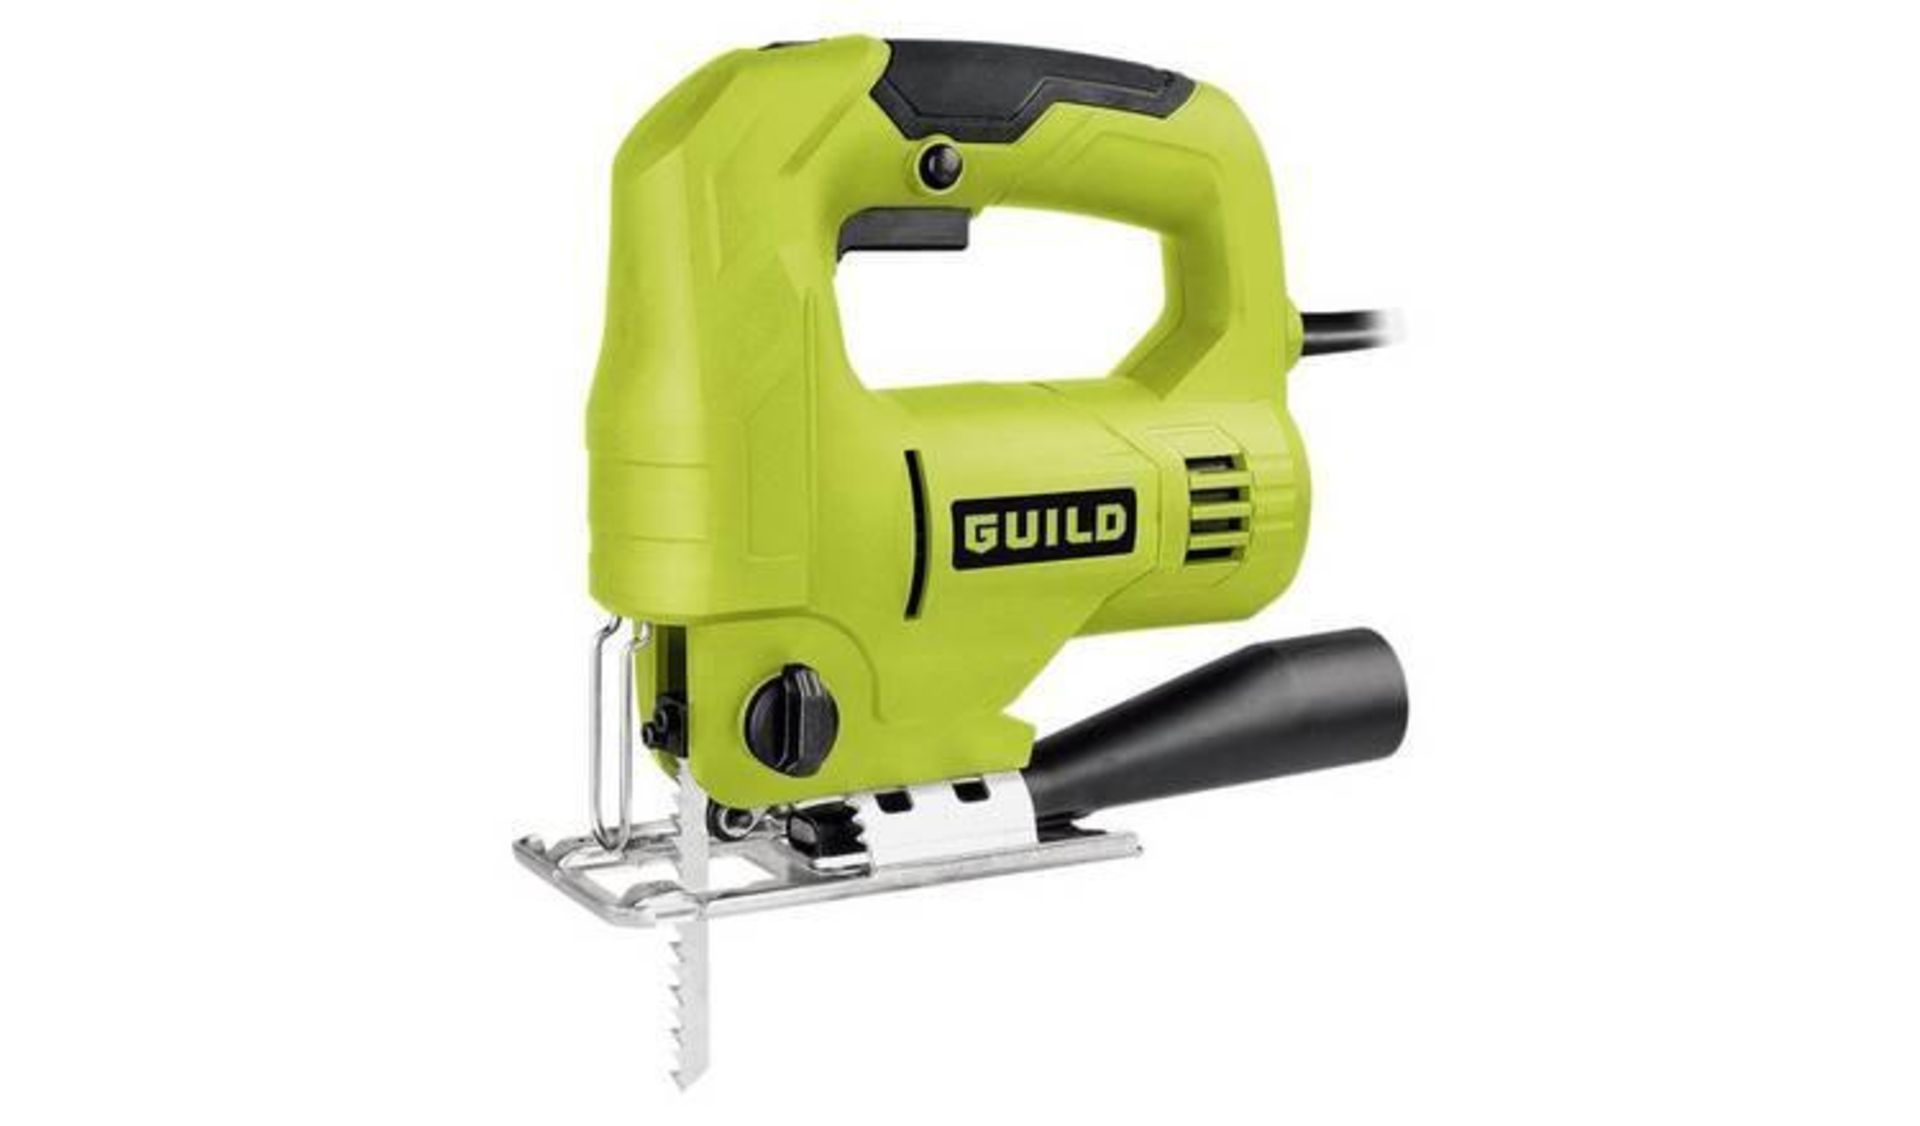 Guild Variable Speed Jigsaw - 550W - £30.00 RRP